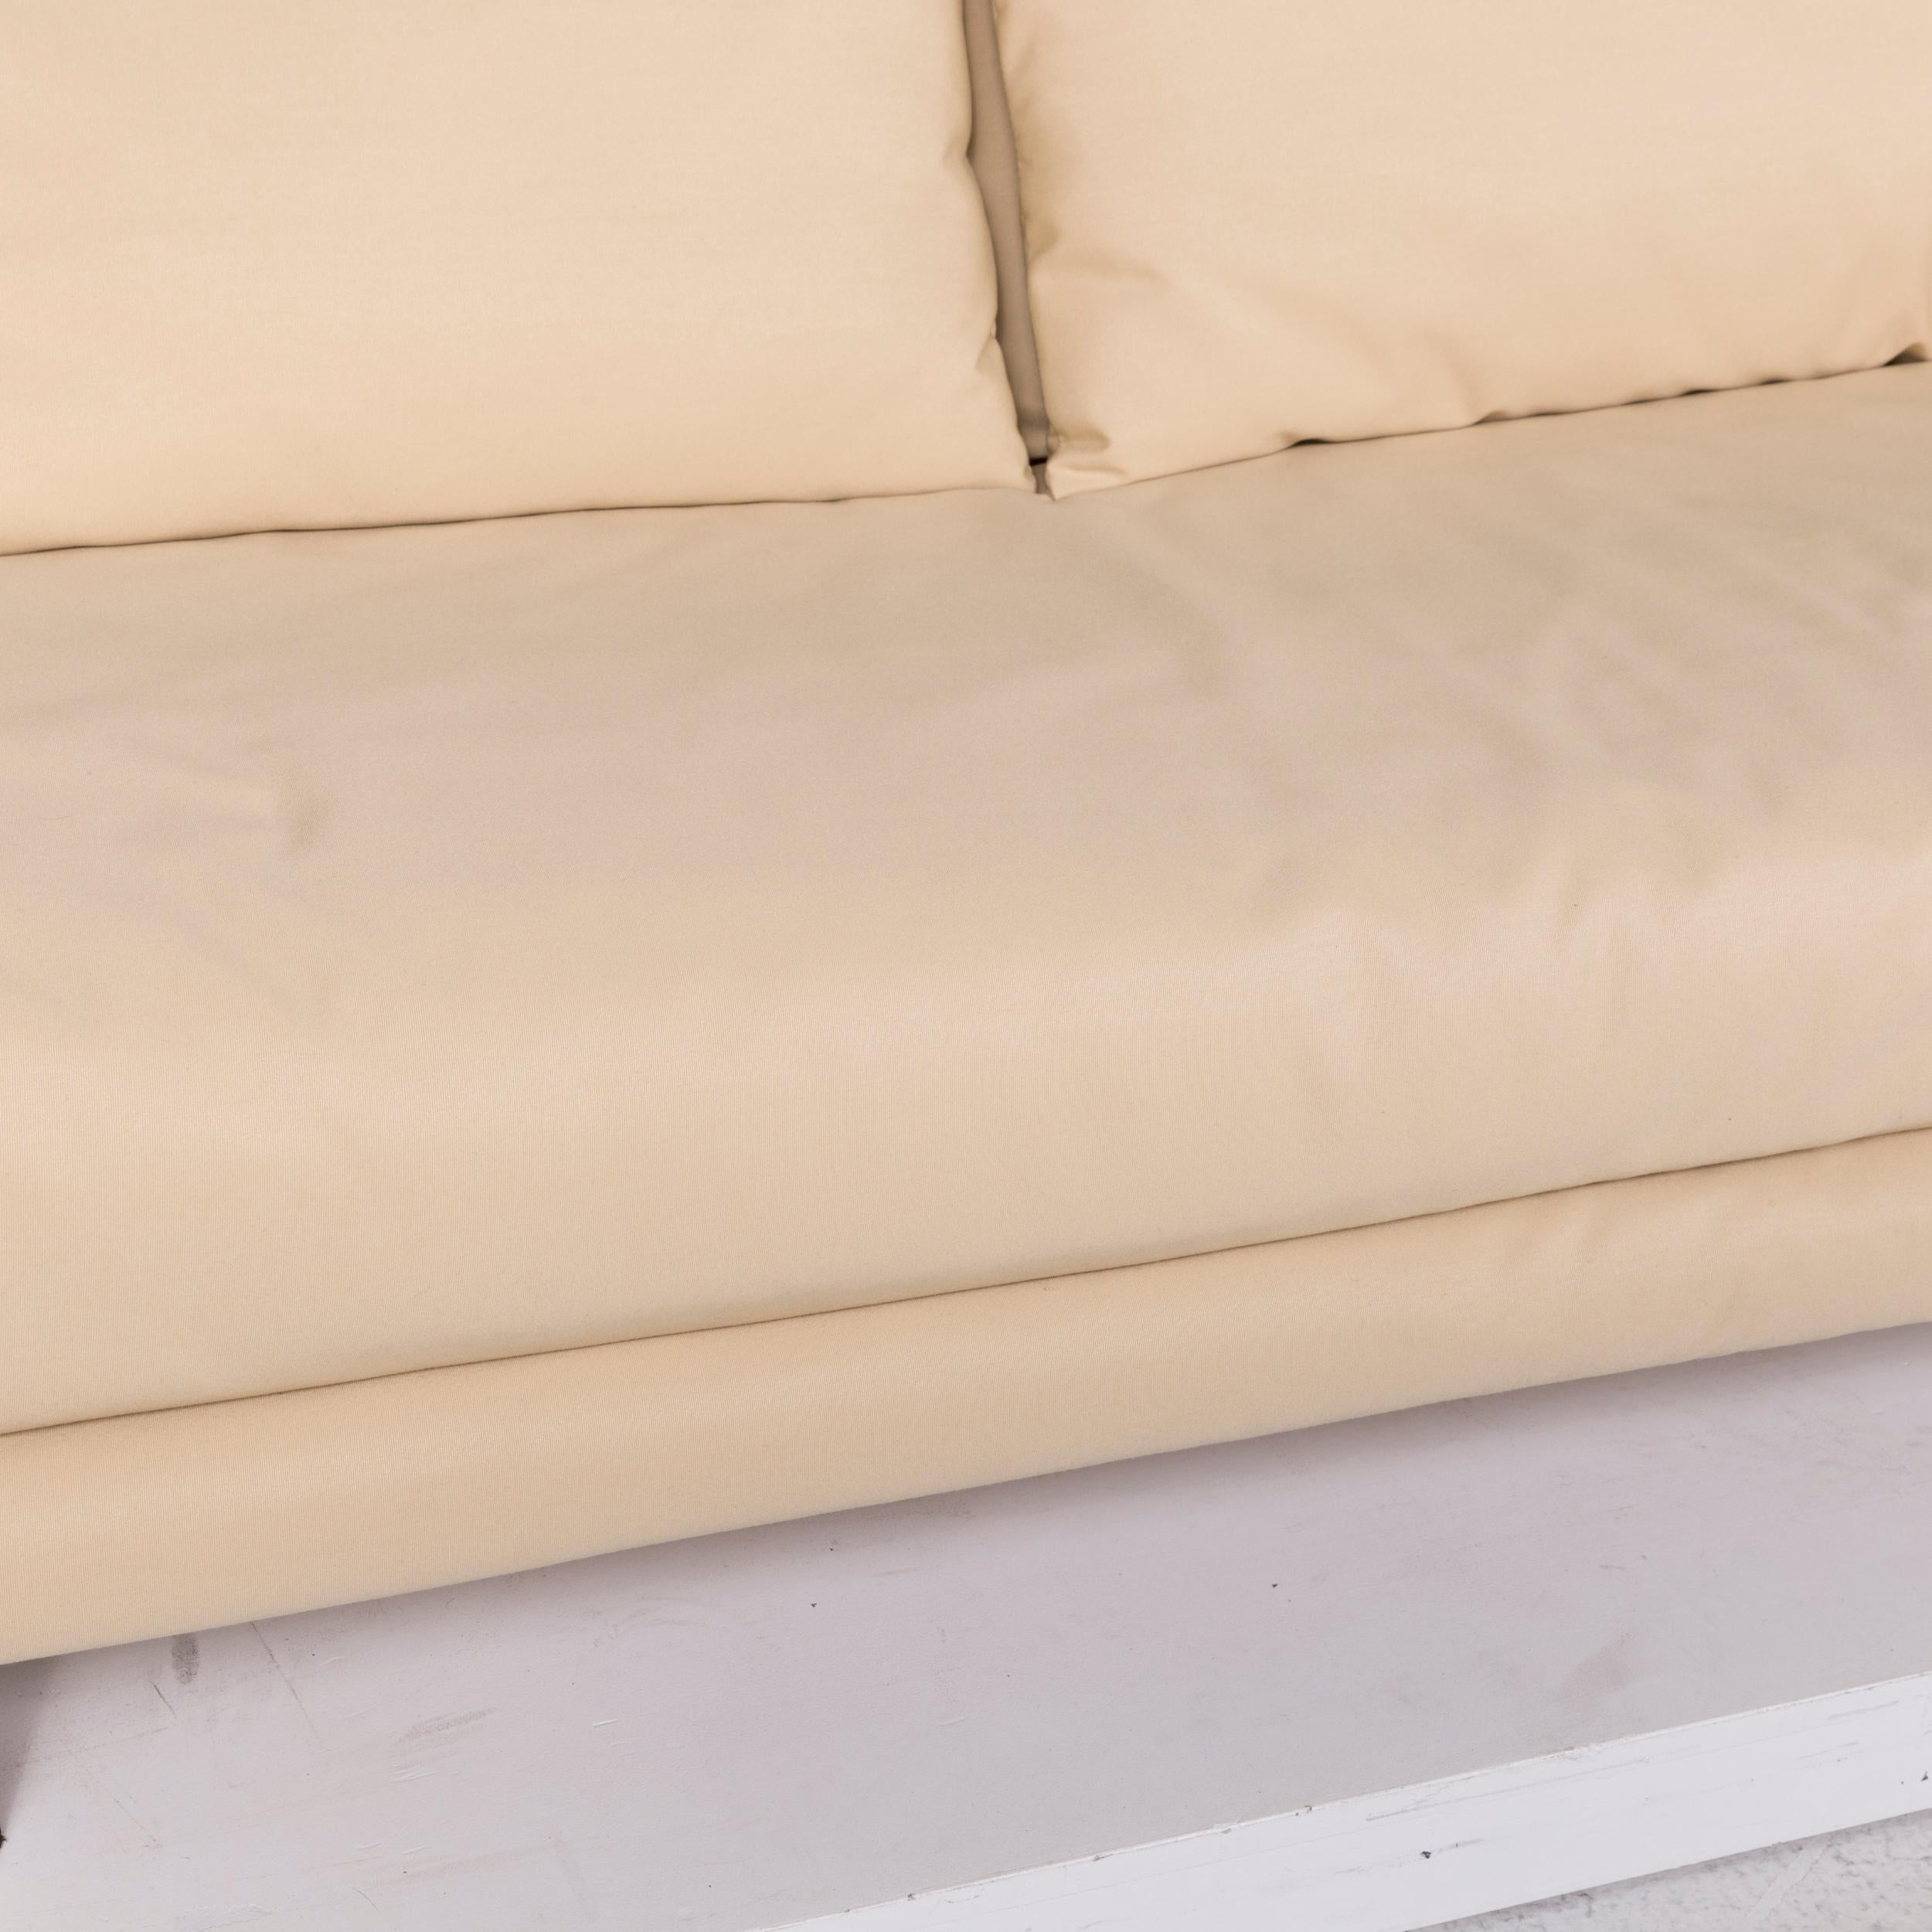 We bring to you a ligne roset multy fabric sofa cream two-seat sofa bed.
 
 

 Product measurements in centimeters:
 

Depth 104
Width 189
Height 81
Seat-height 42
Rest-height 56
Seat-depth 52
Seat-width 120
Back-height 43.